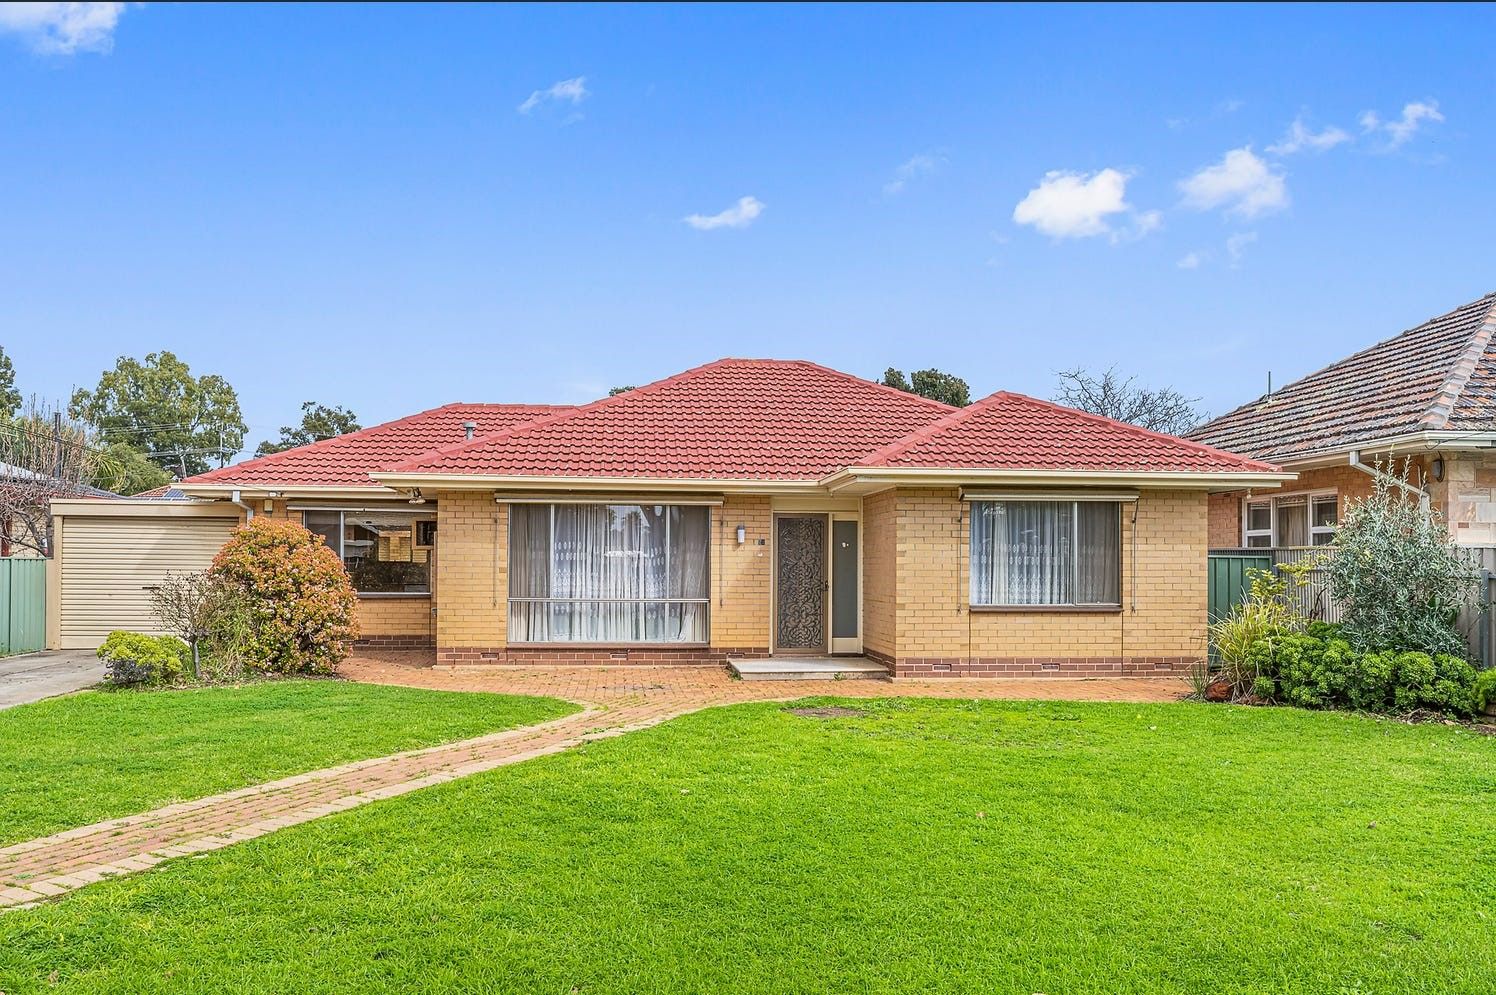 4 bedrooms House in 52 Church Road CAMPBELLTOWN SA, 5074